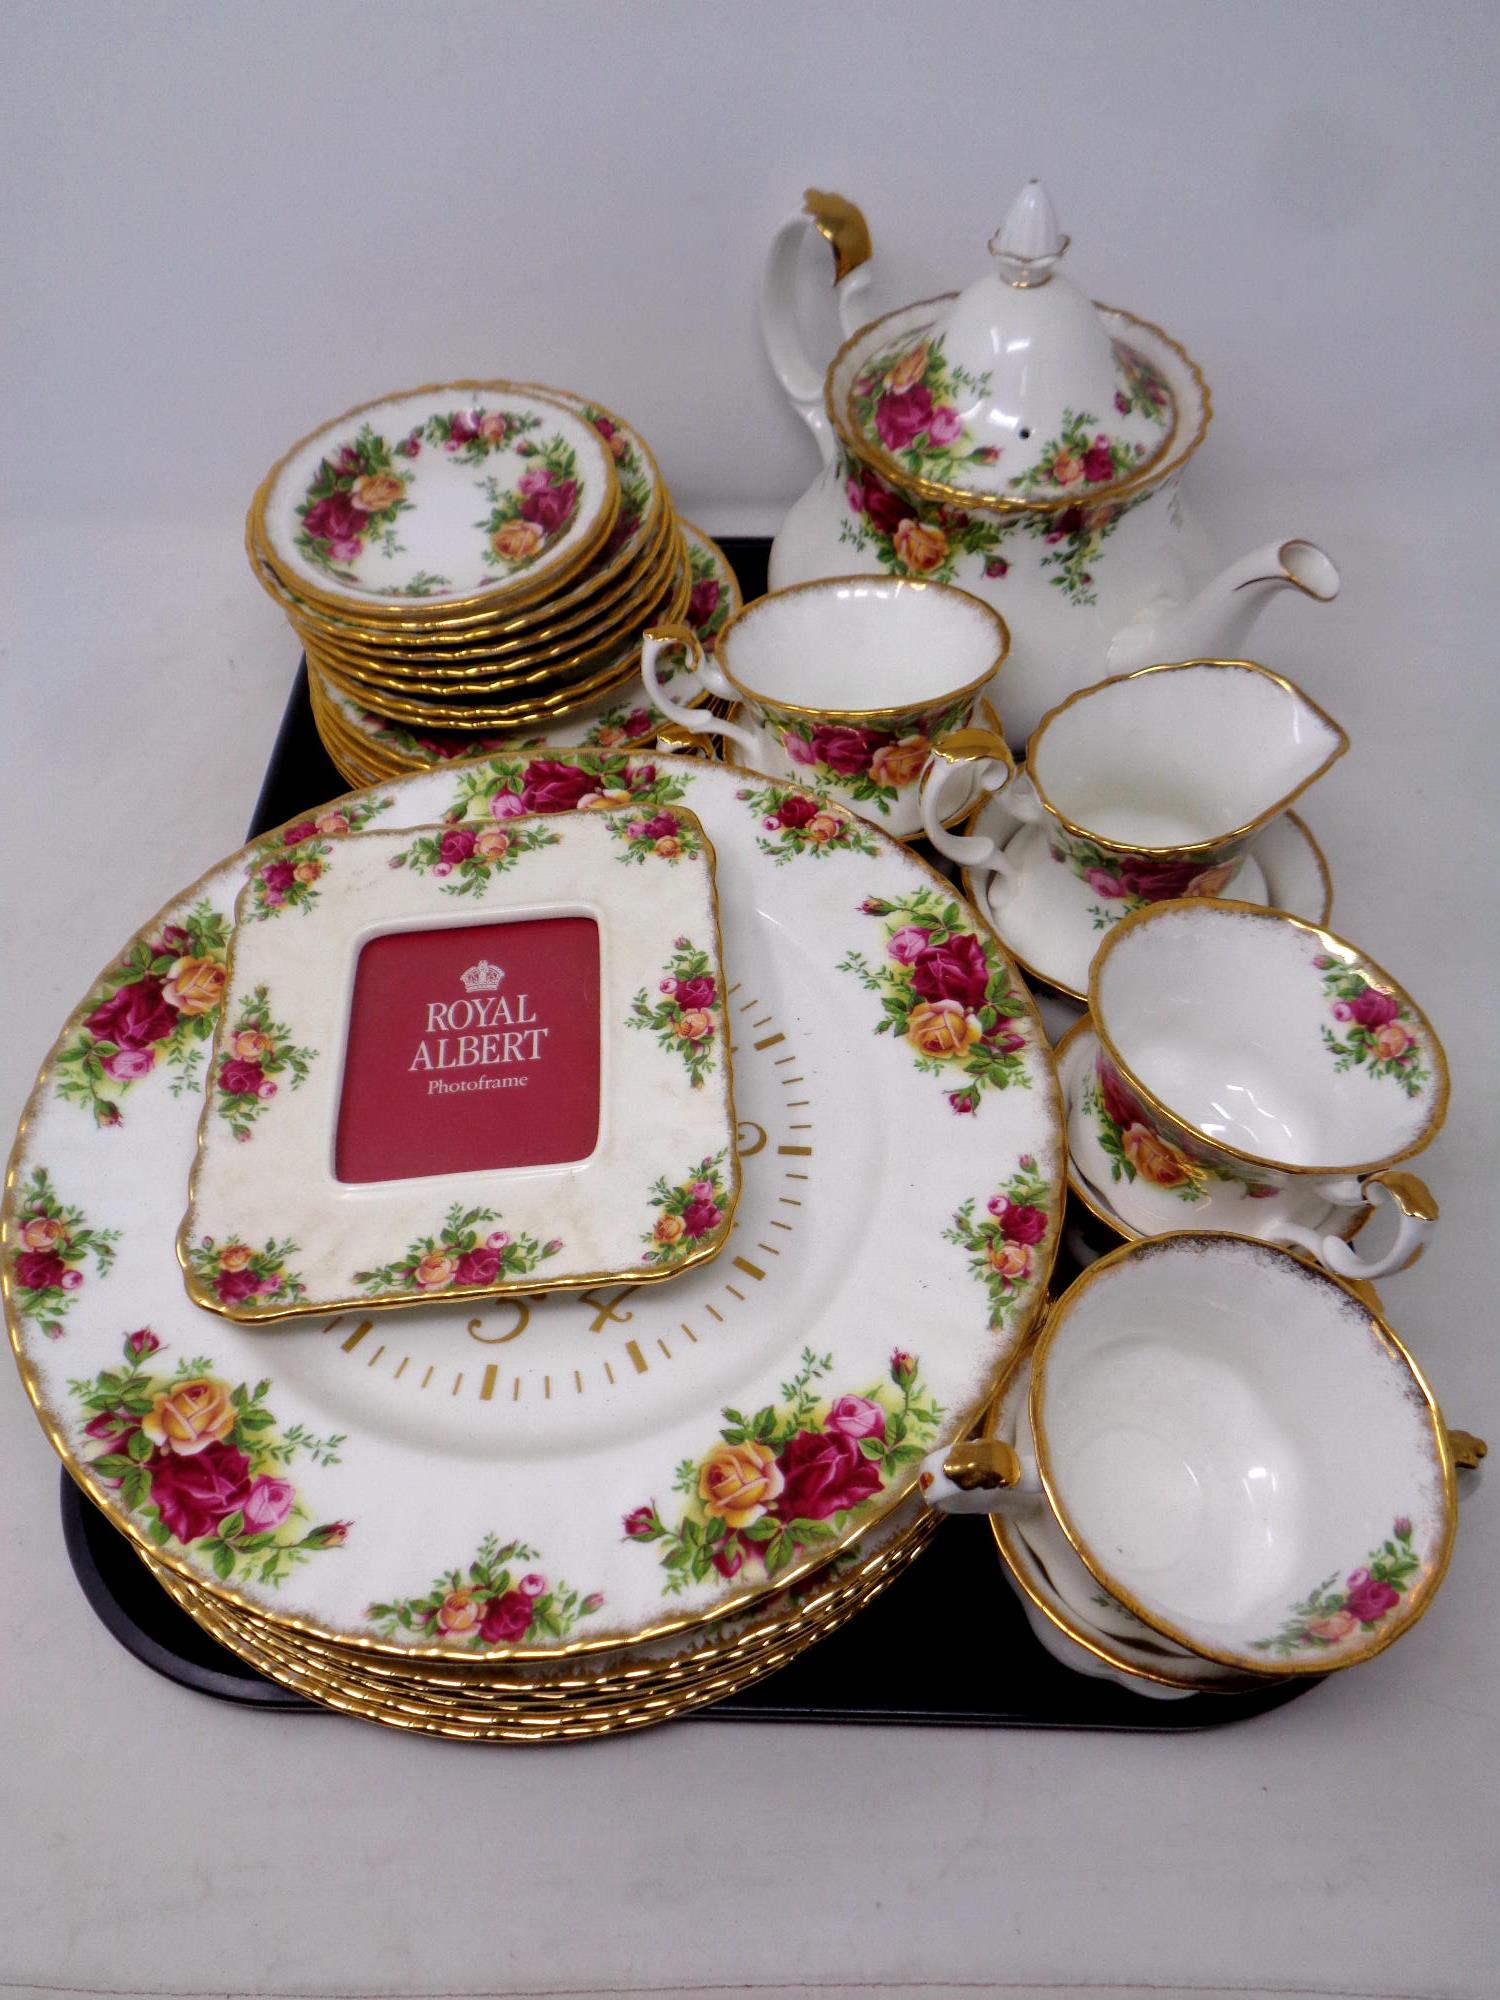 A tray containing 31 pieces of Royal Albert Old Country Roses tea and dinner china, photo frame,